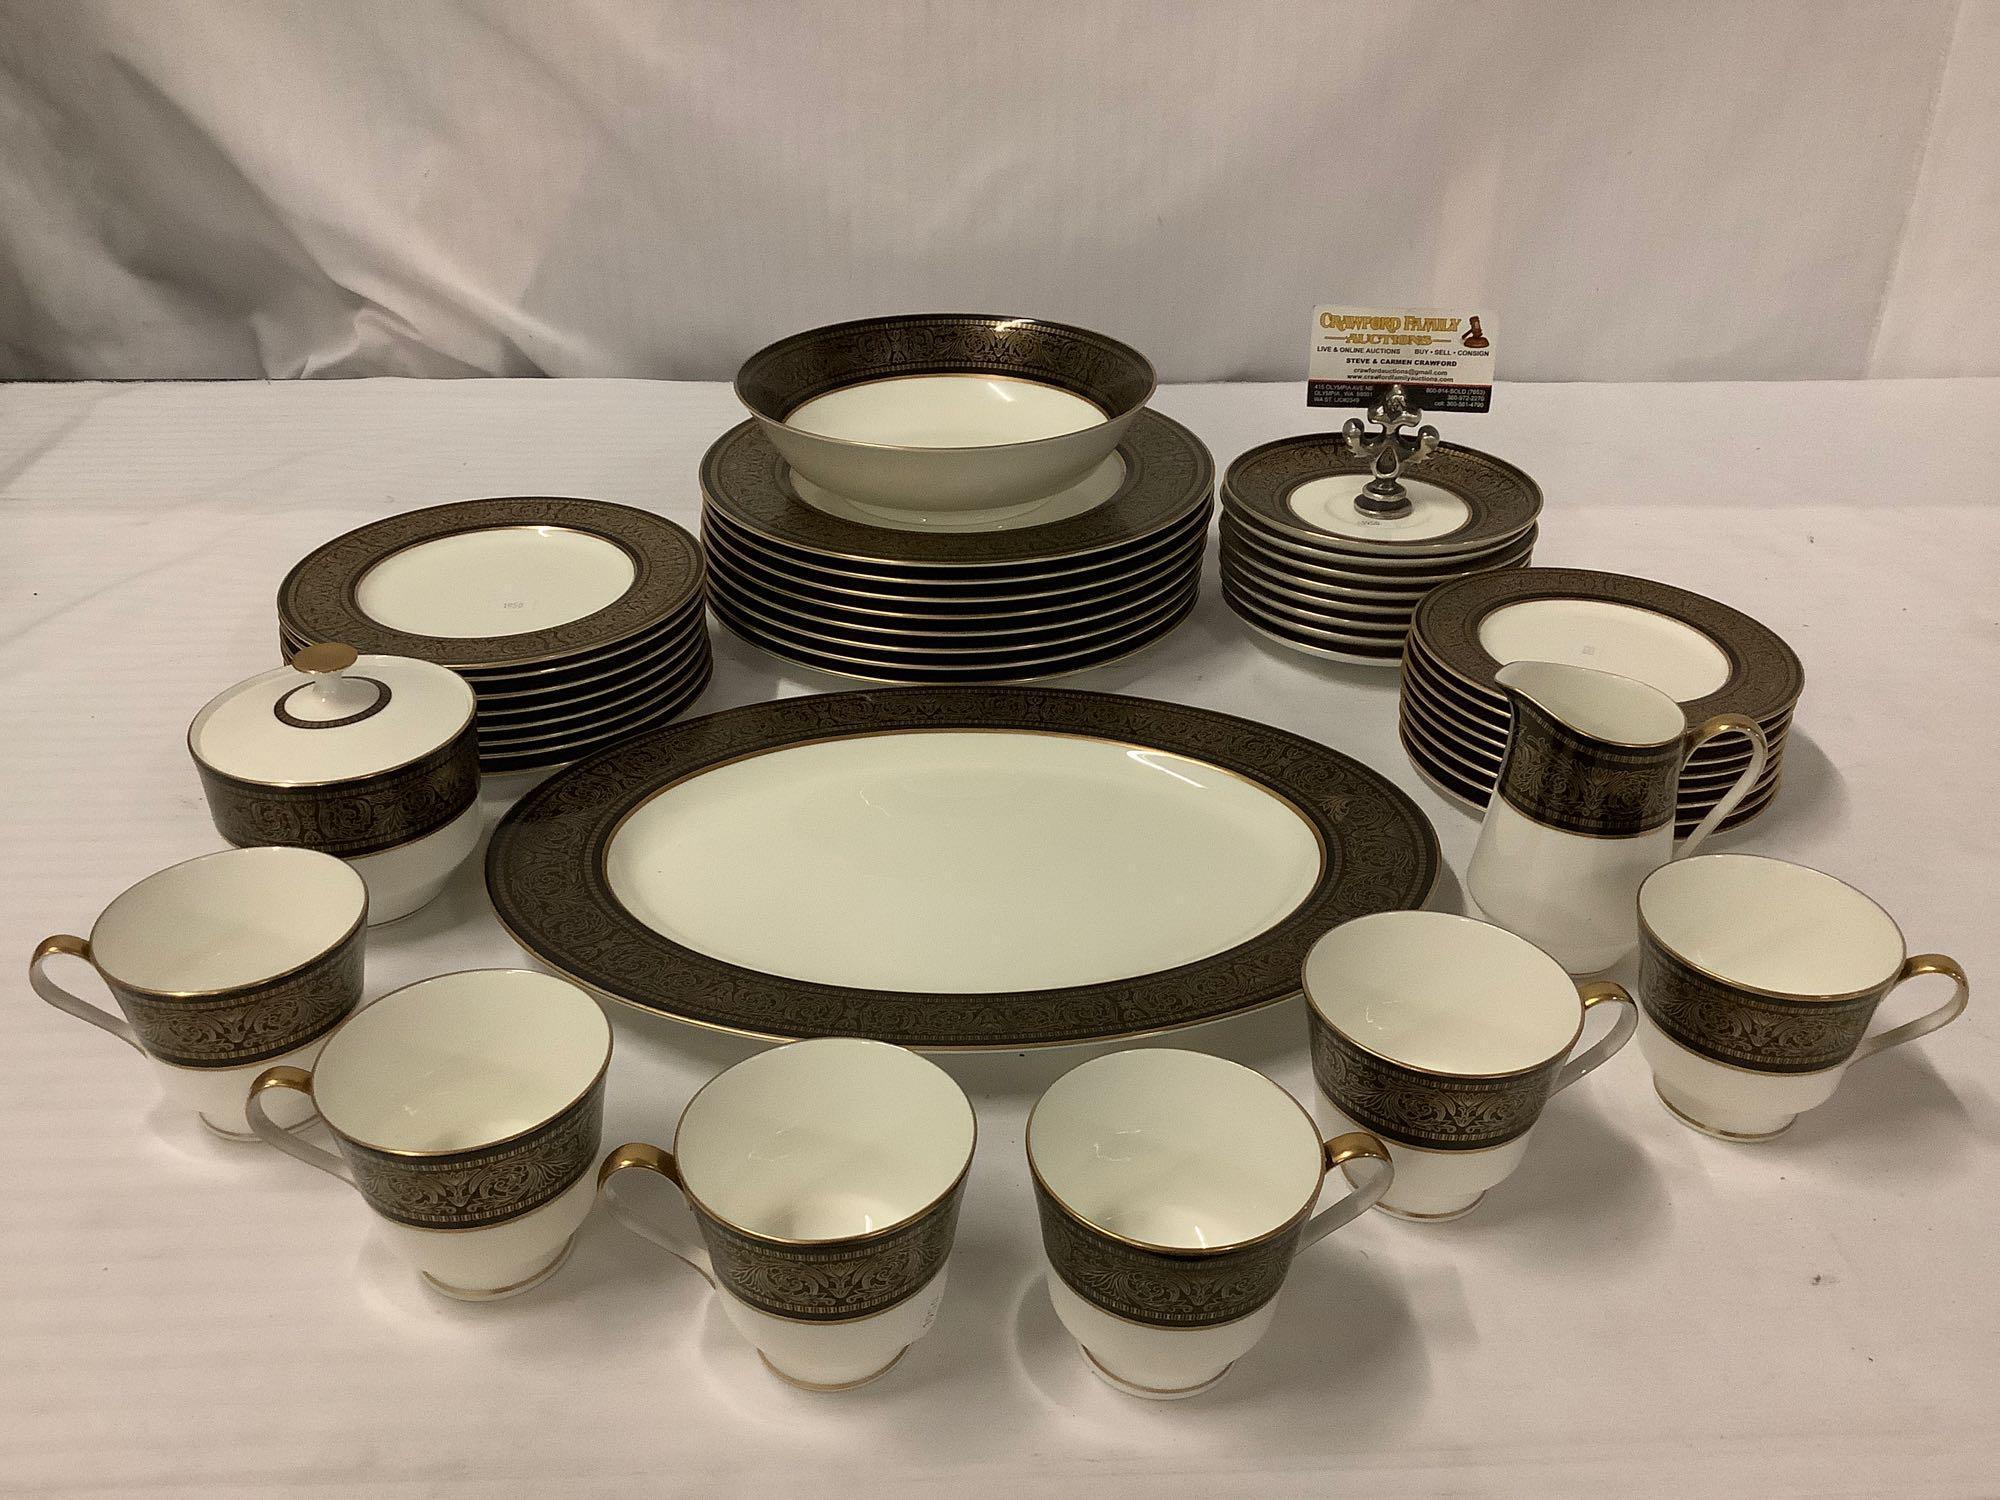 42 pc service for 6 porcelain china set by Mikasa - Mount Holyoke, made in Narumi Japan